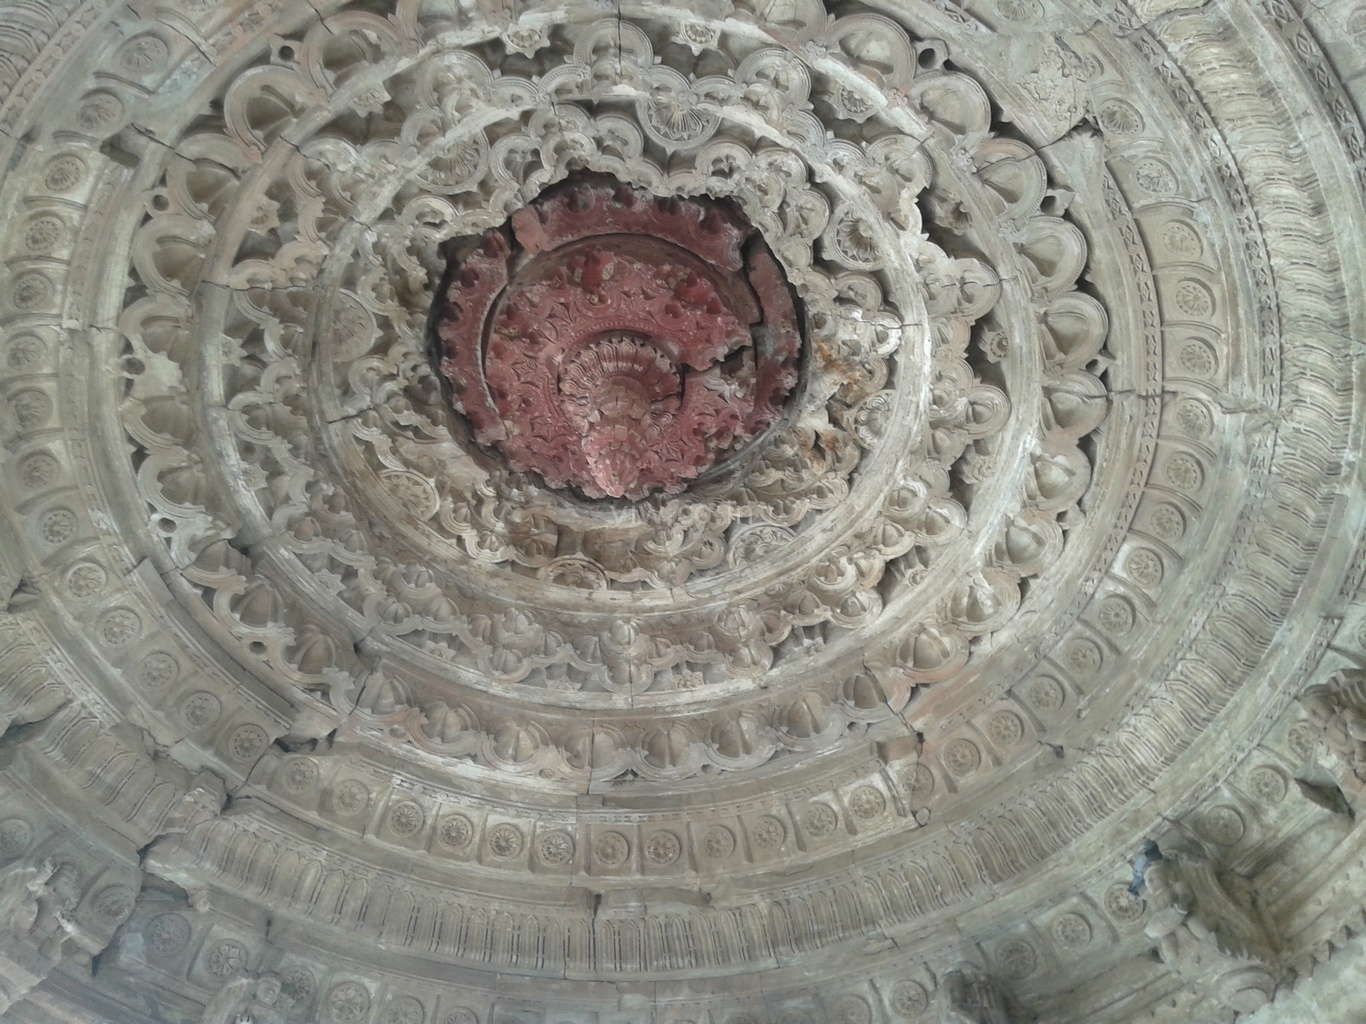 Roof design of temple in Bhangarh fort